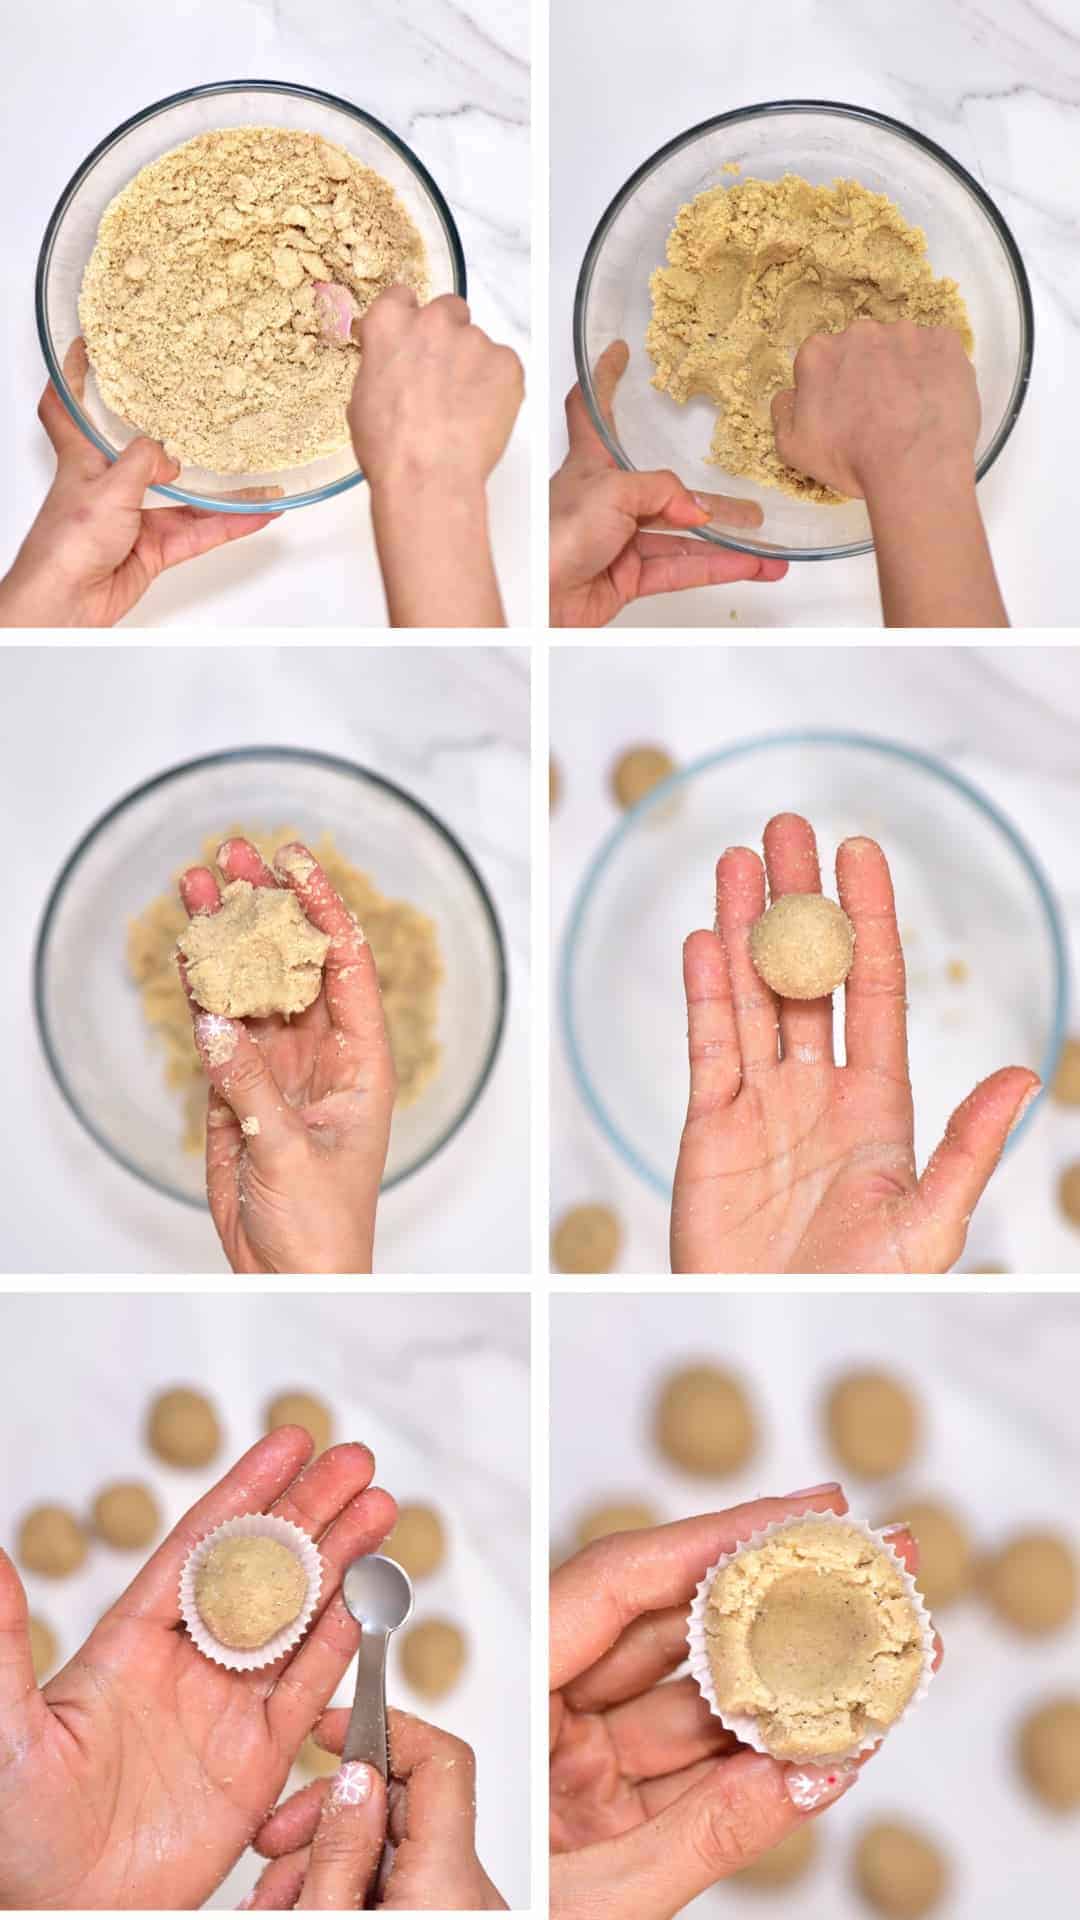 Steps to making the cookie base